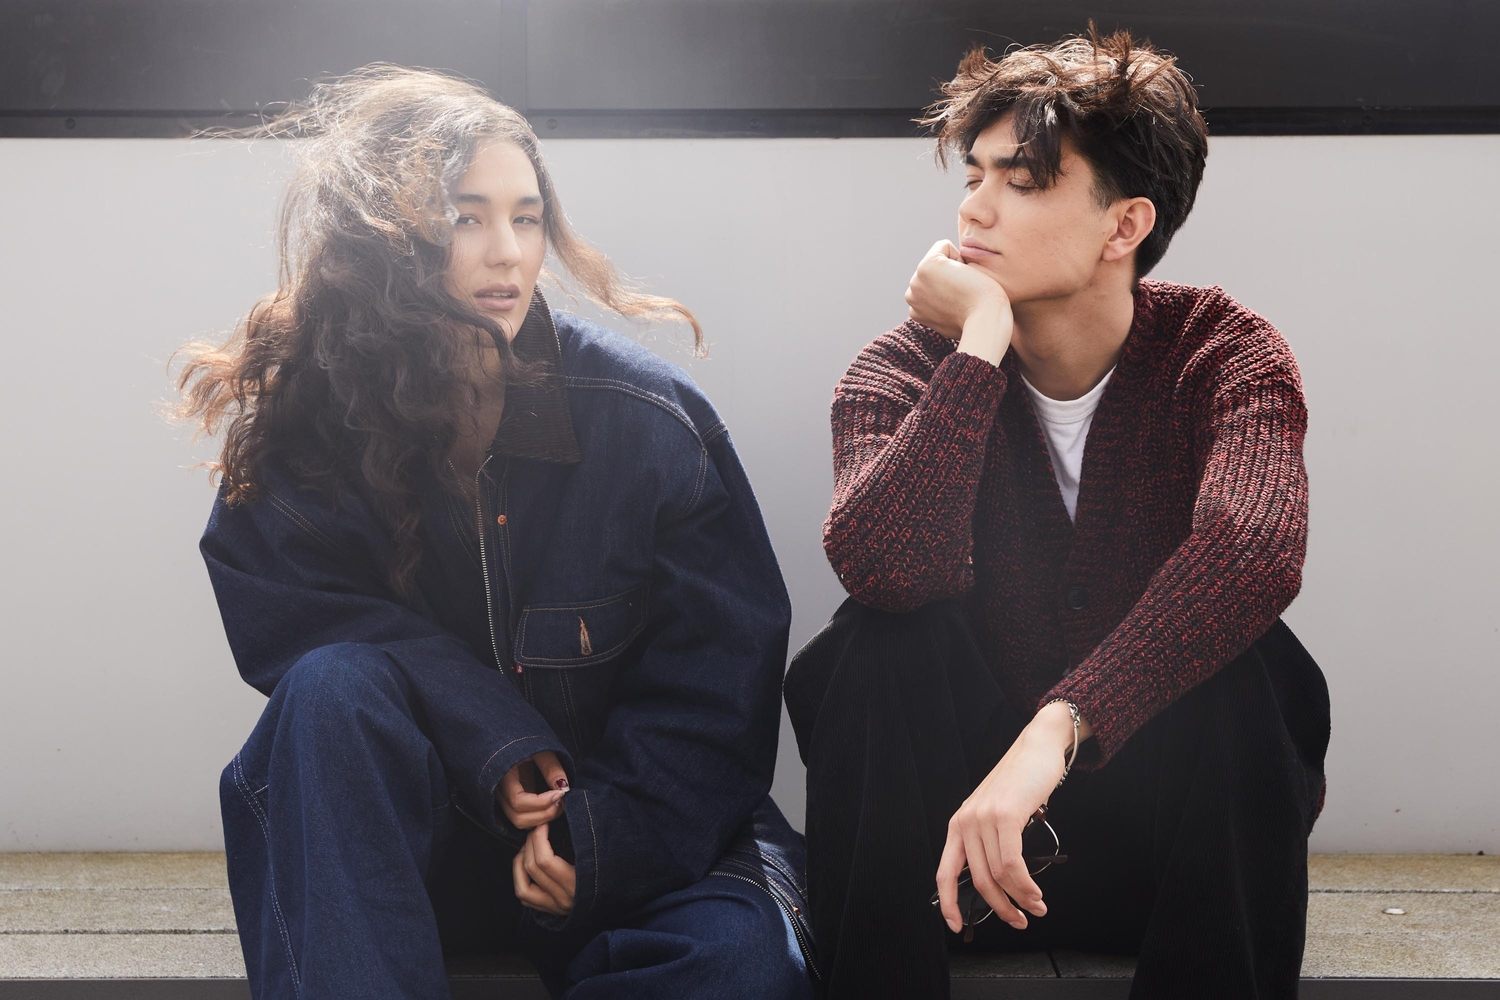 Wasia Project on sibling dynamics, Heartstopper and latest single 'Is This What Love Is?'